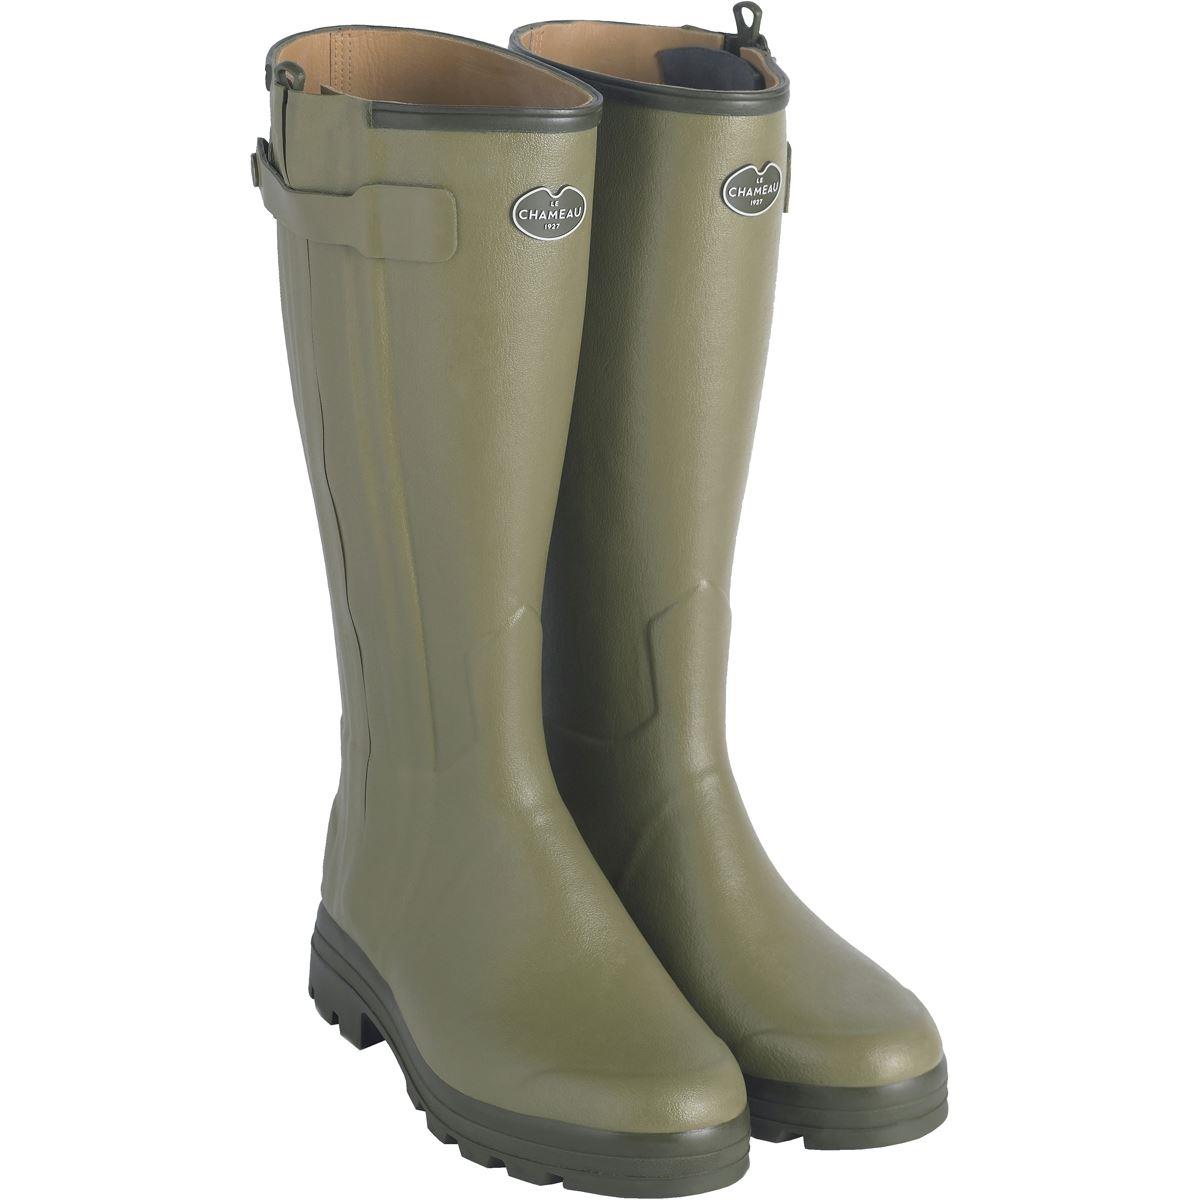 Le Chameau Chasseur Leather Lined Wellington Boots Questions & Answers